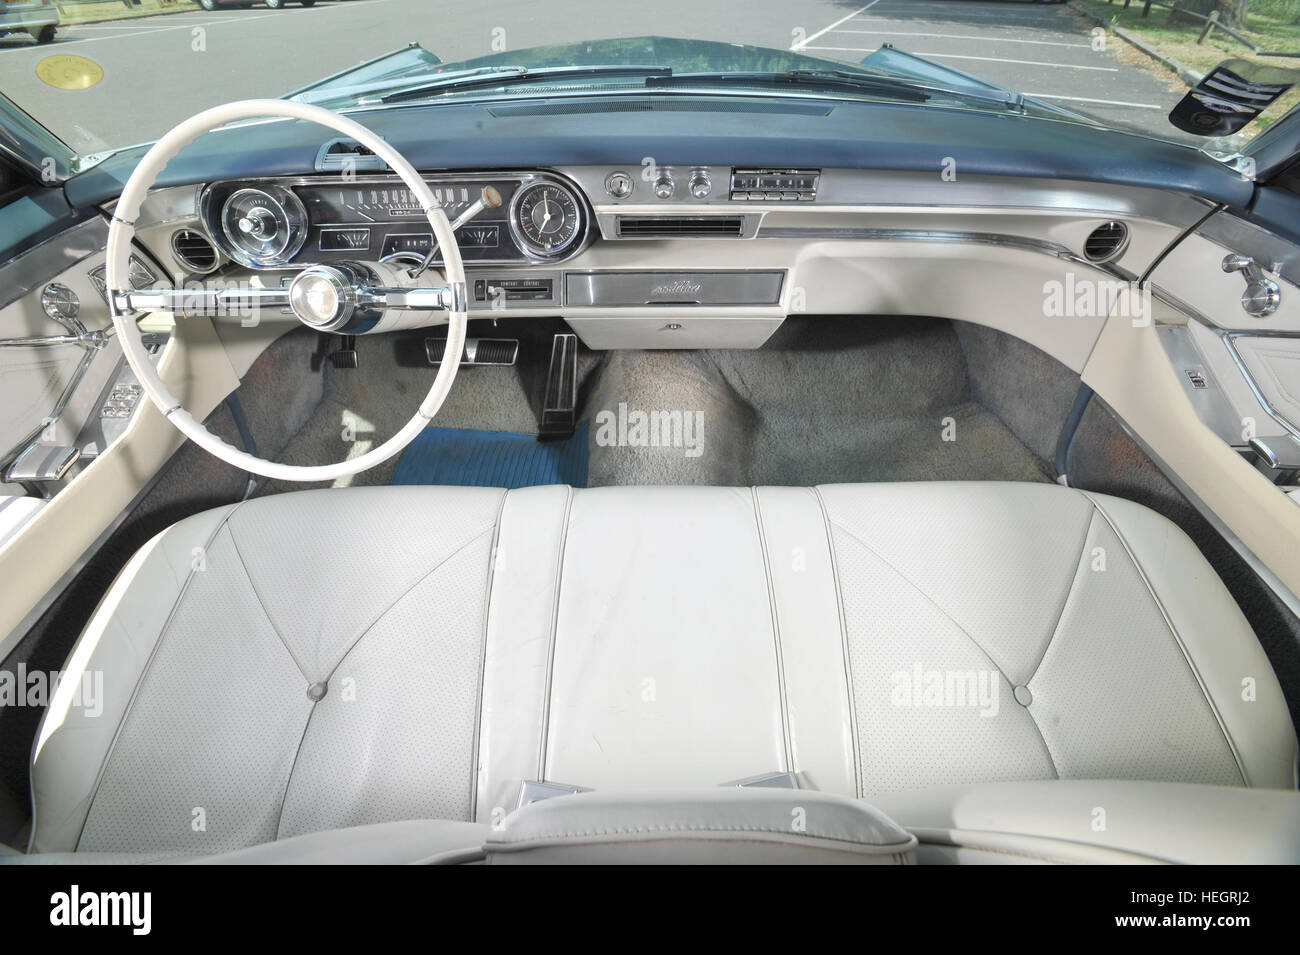 1965 Cadillac Coupe de Ville American luxury 2 door coupe front bench seat, dashboard and interior Stock Photo